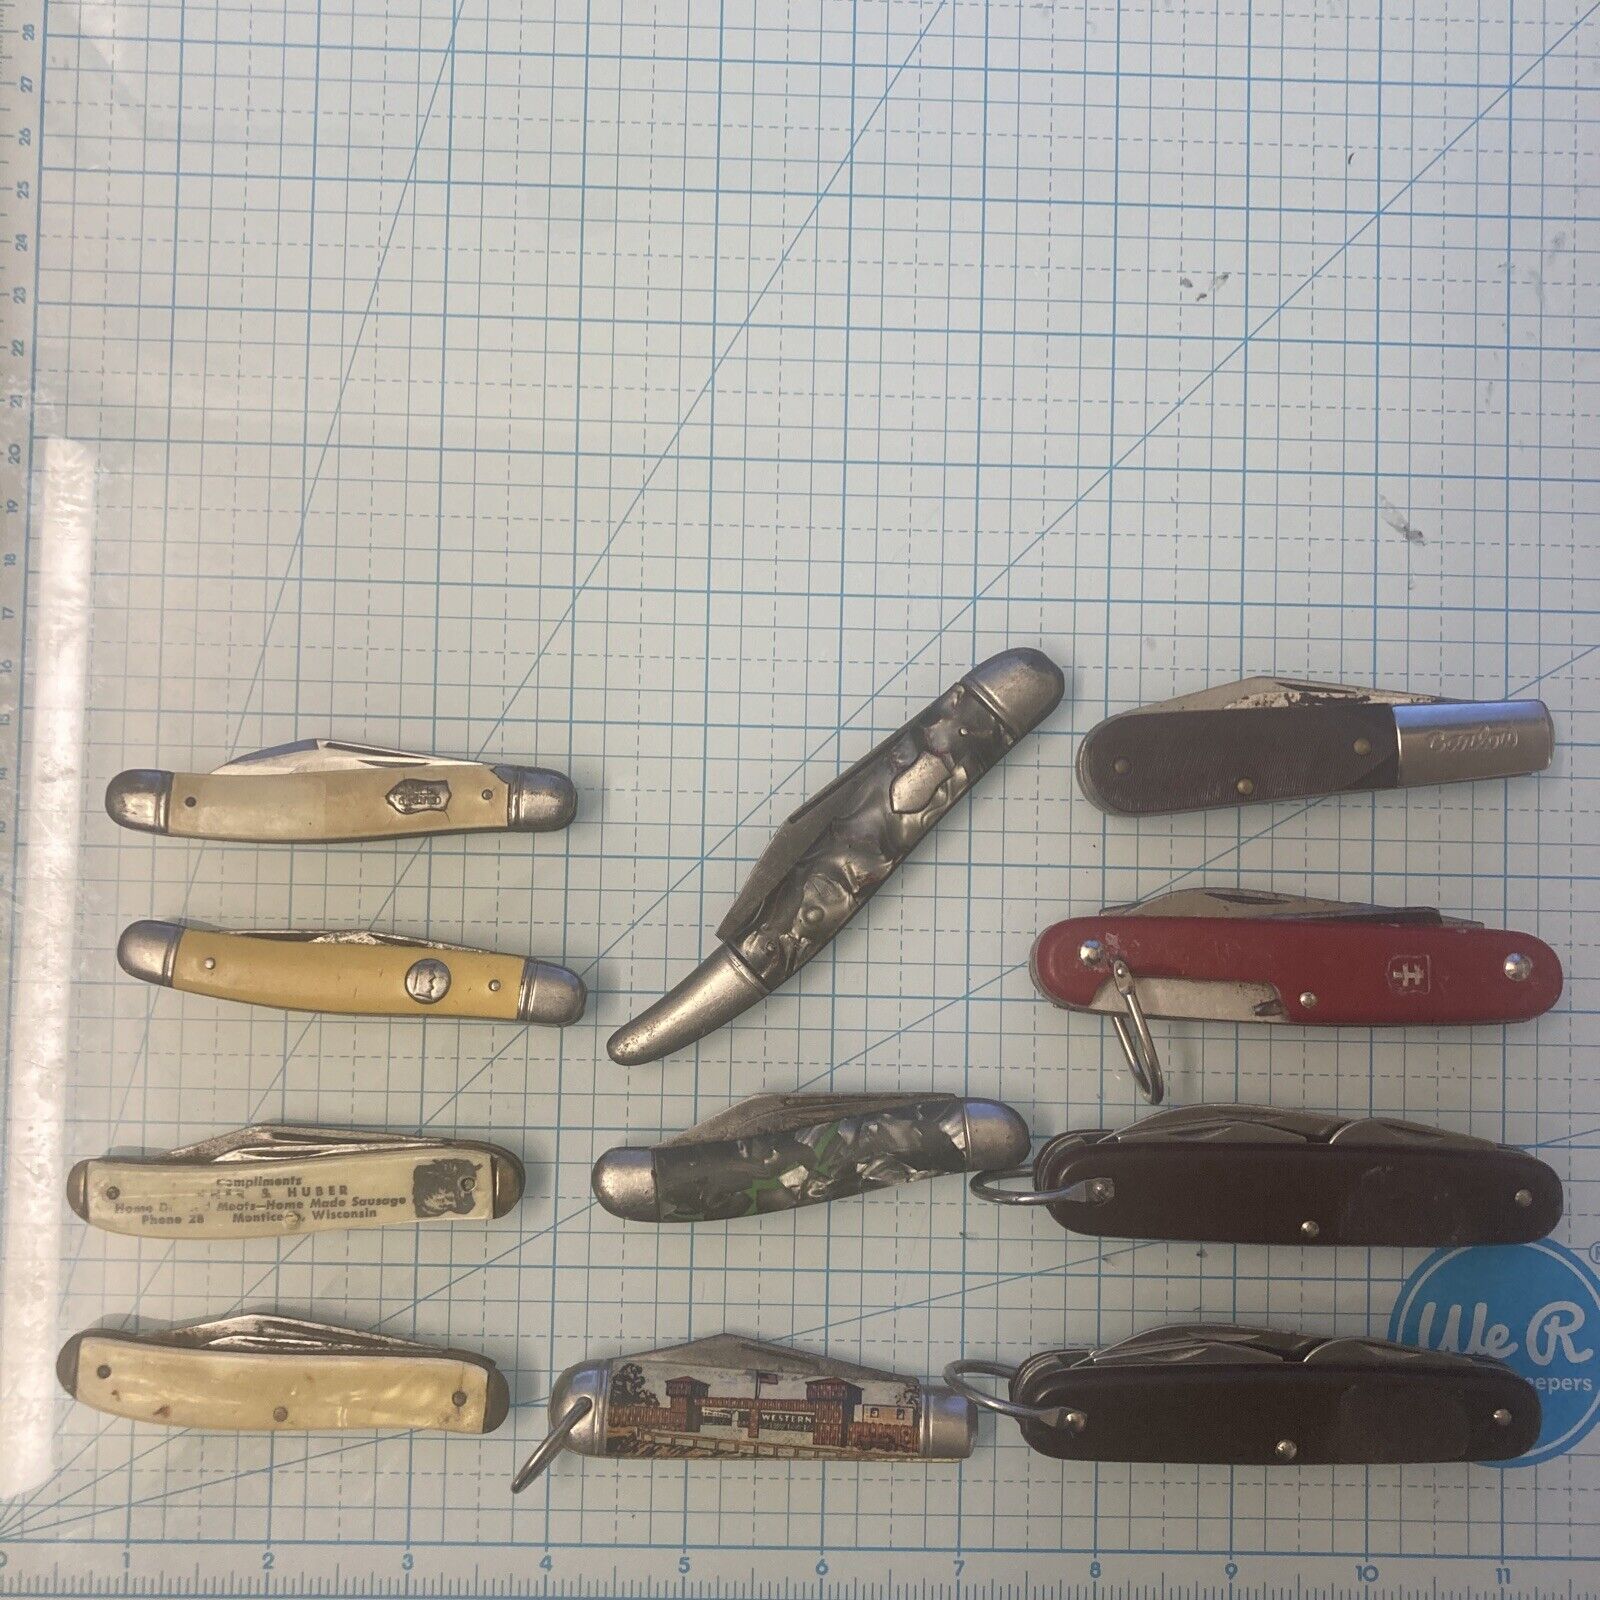 11 USED Vintage IMPERIAL/COLONIAL Prov. R.I. USA Pocket Knives. GREAT DEAL LOOK